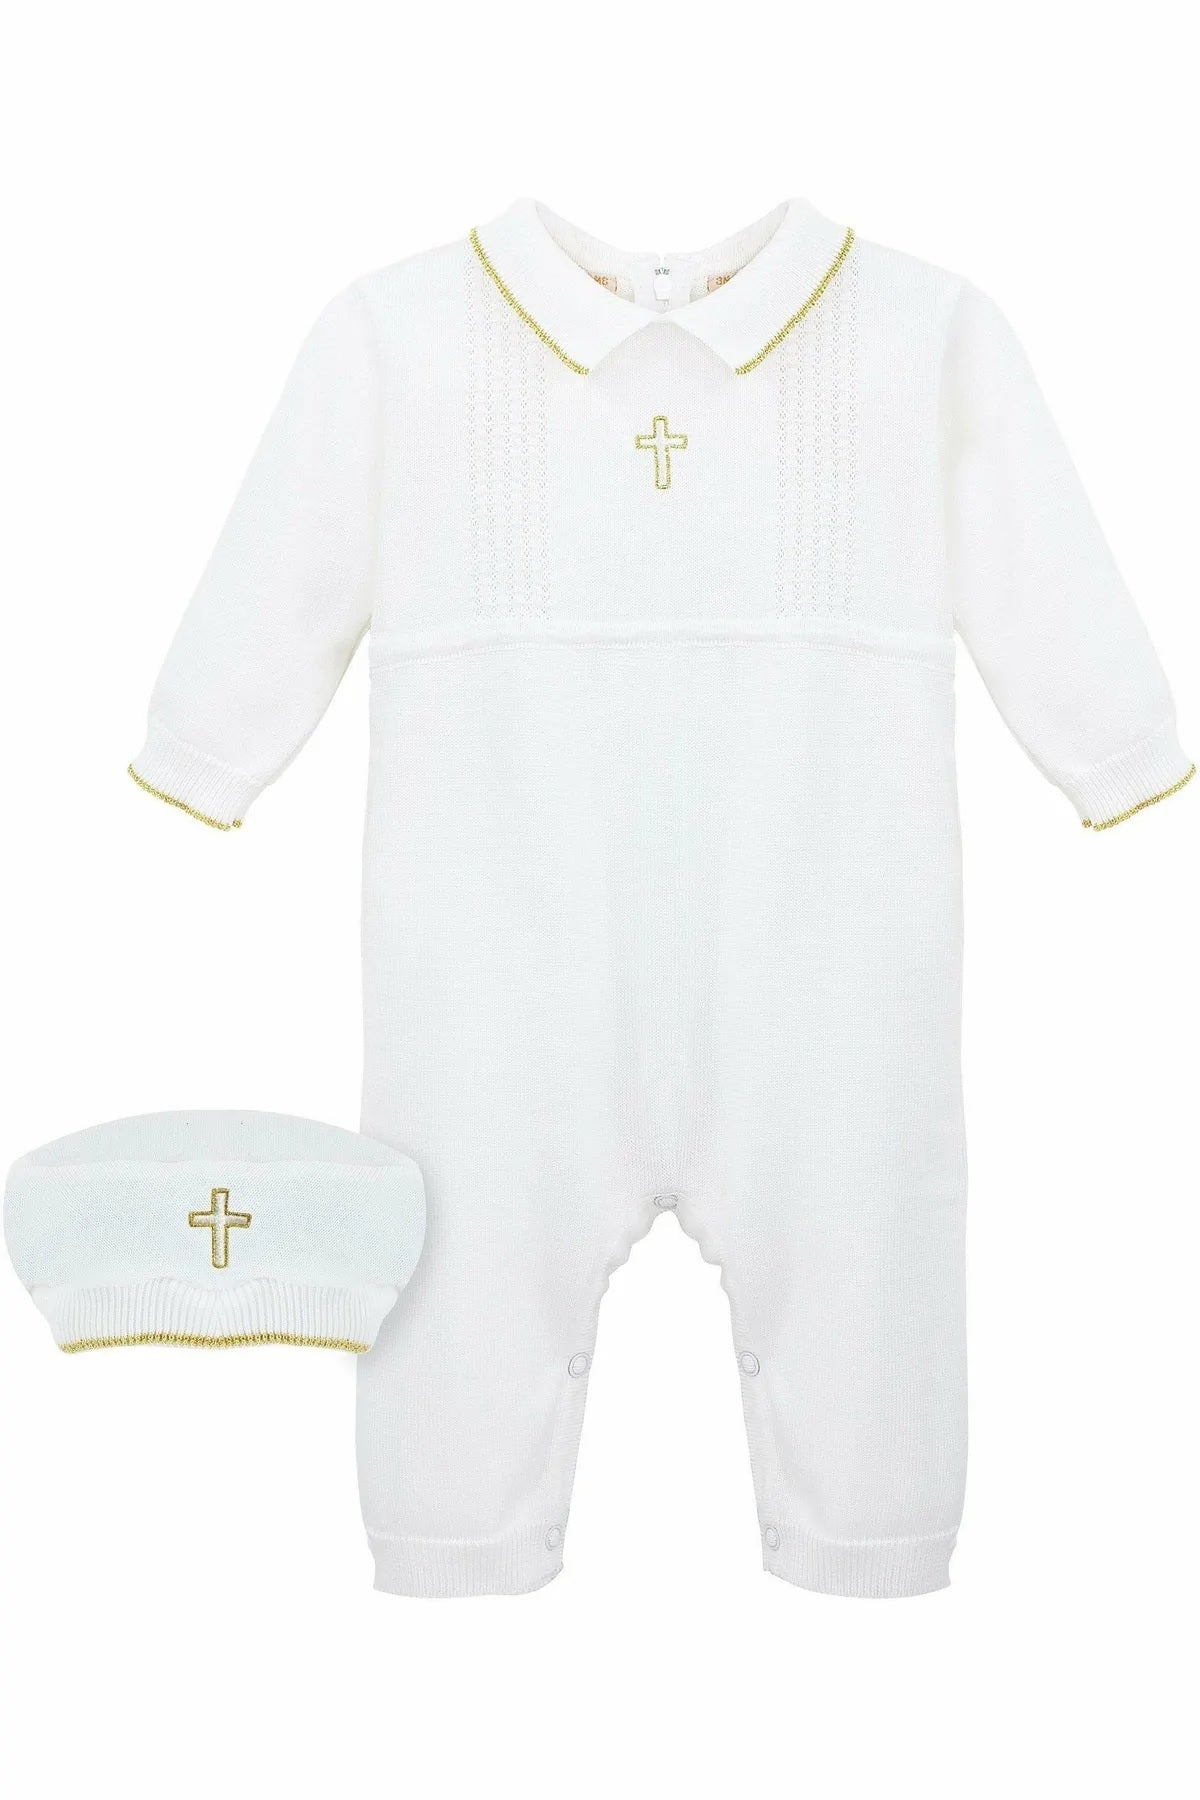 Baby Boy Longalls - Carriage Boutique